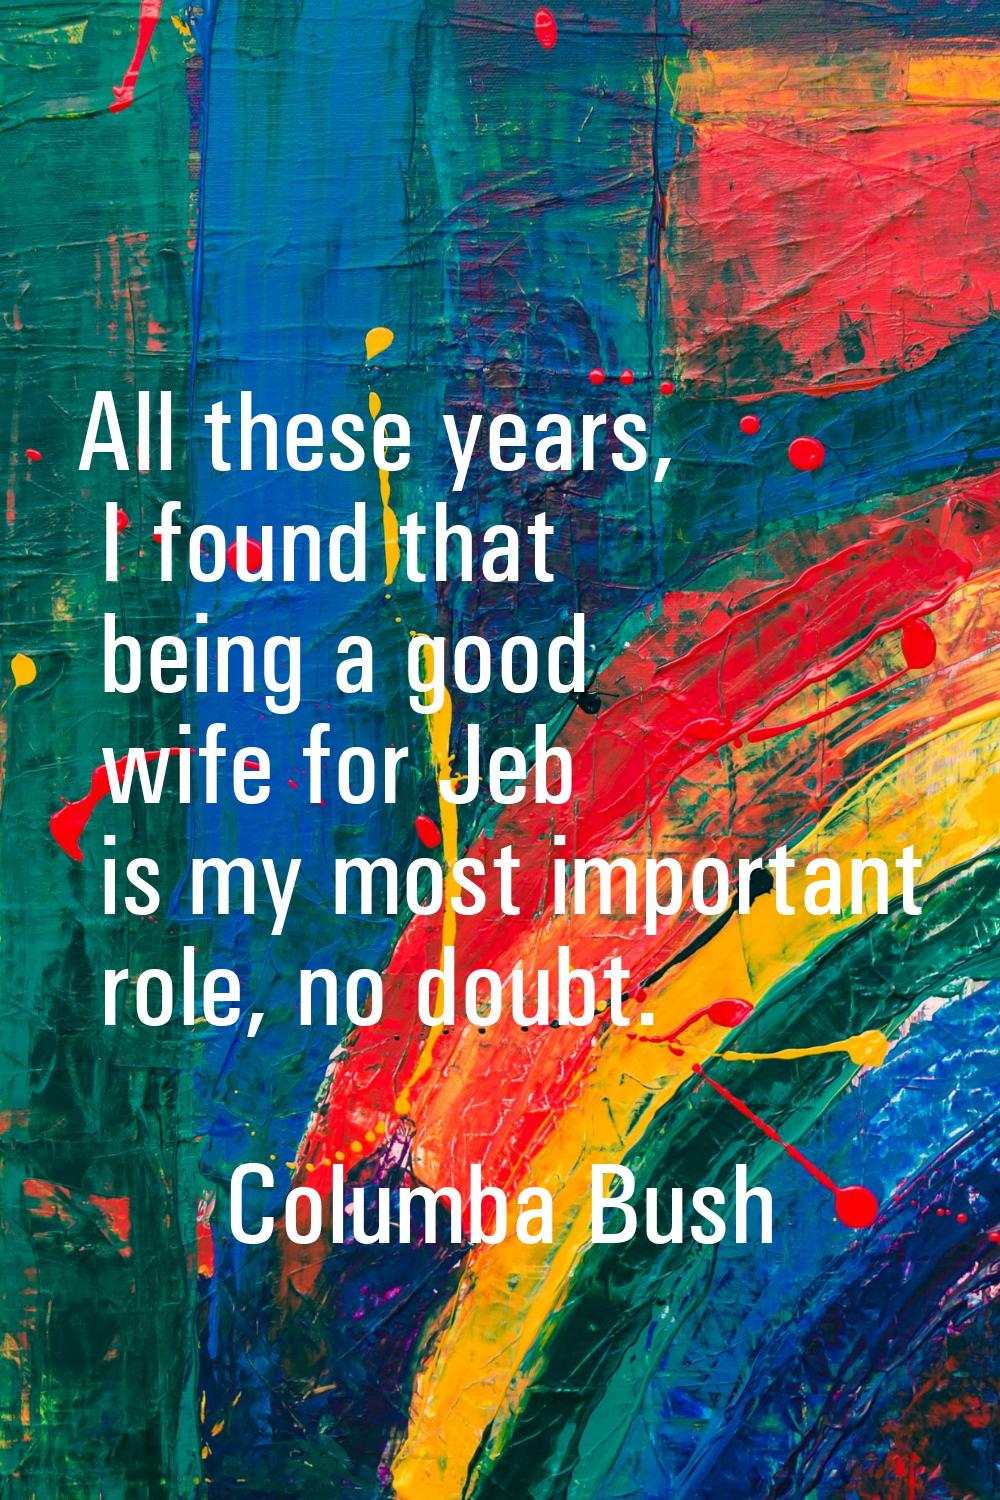 All these years, I found that being a good wife for Jeb is my most important role, no doubt.